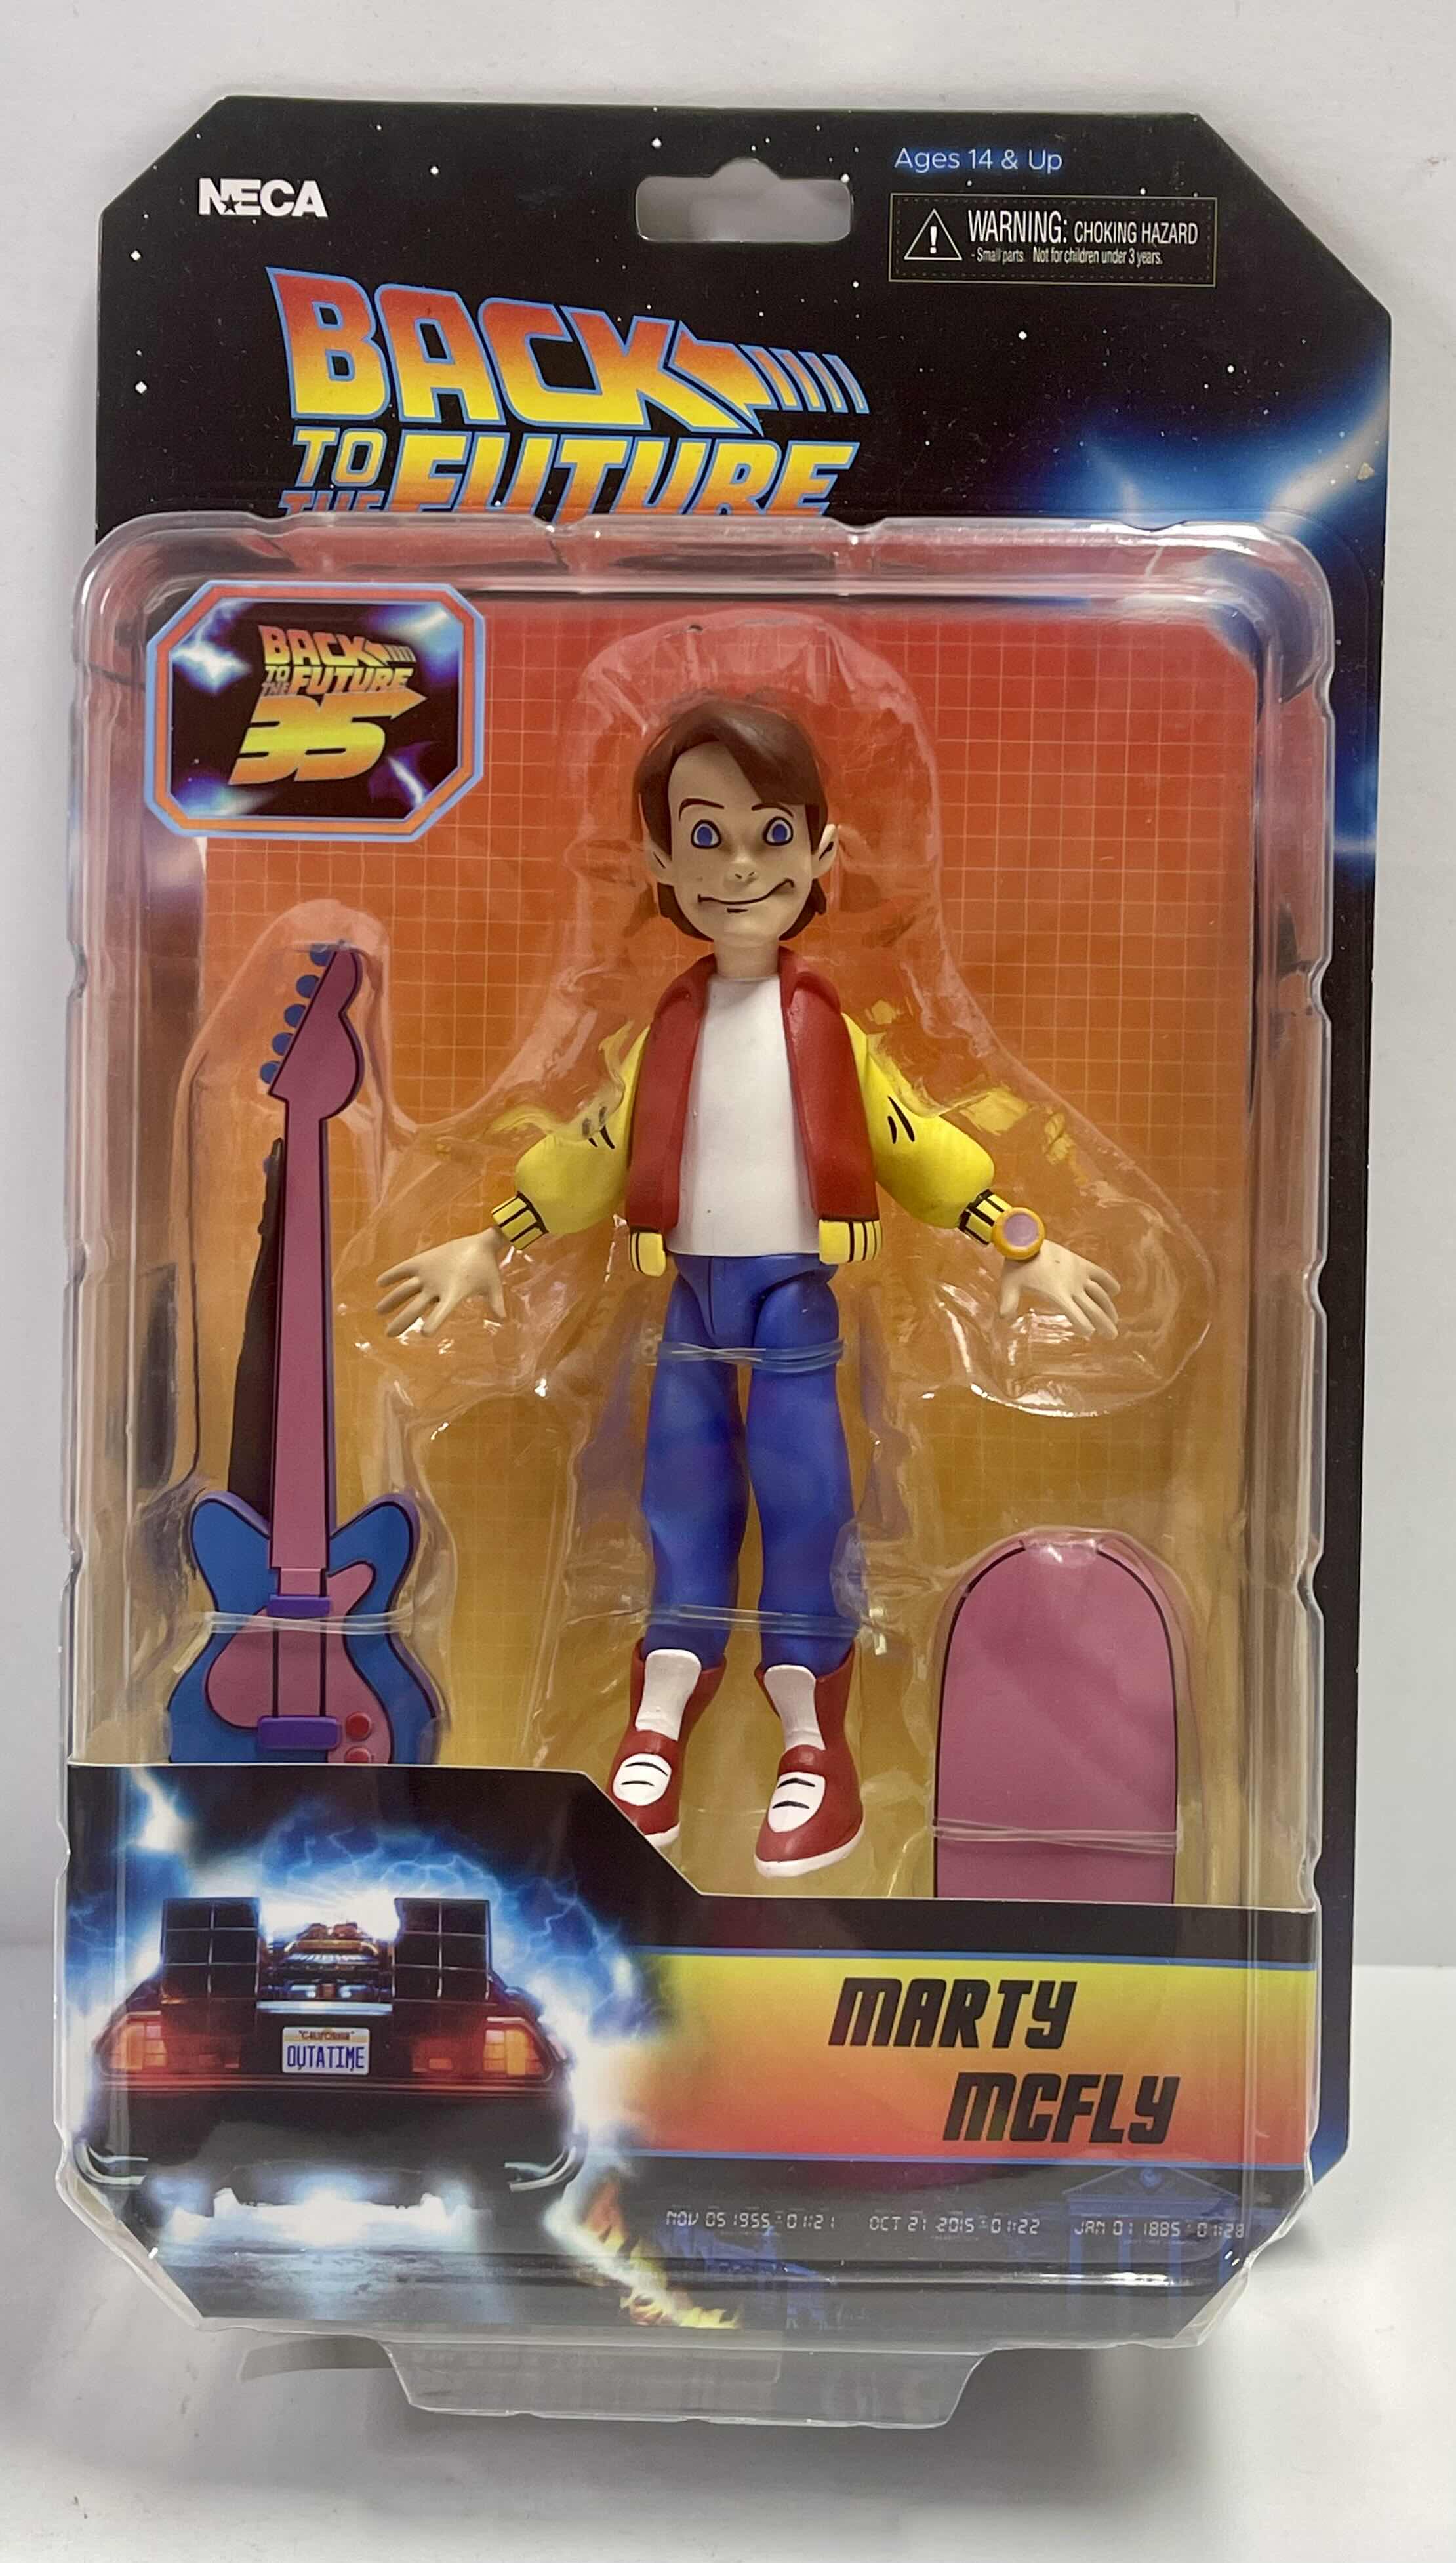 Photo 1 of NIB BACK TO THE FUTURE “MARTY MCFLY” ACTION FIGURE- RETAIL PRICE $21.99